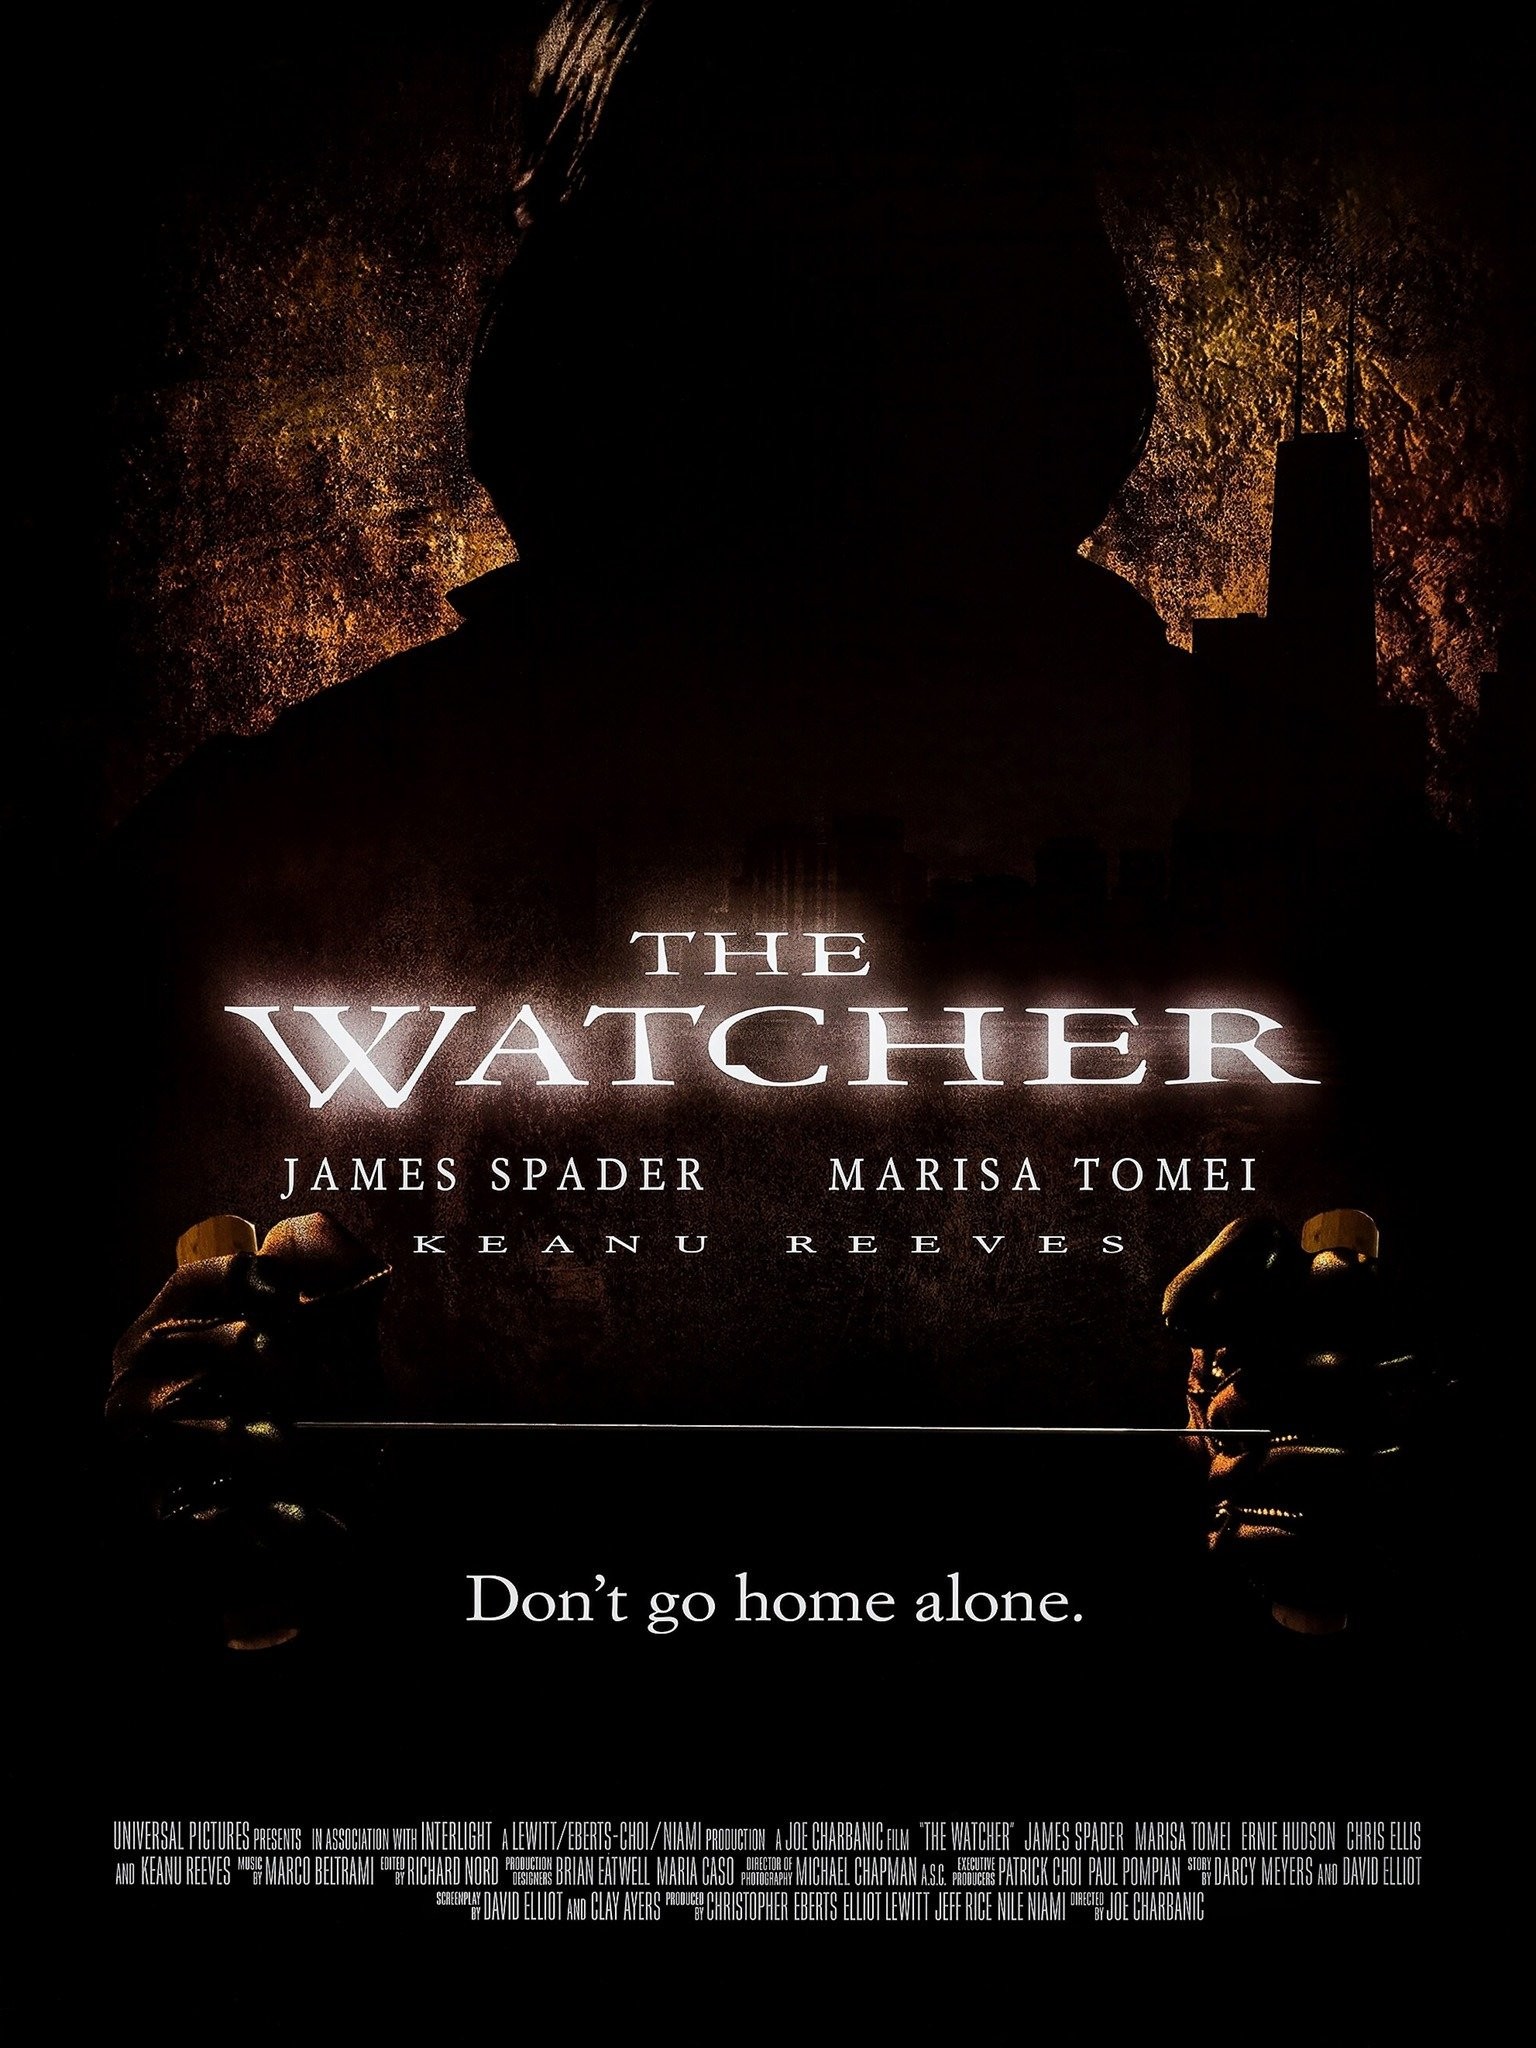 The Watcher in the Woods - Rotten Tomatoes